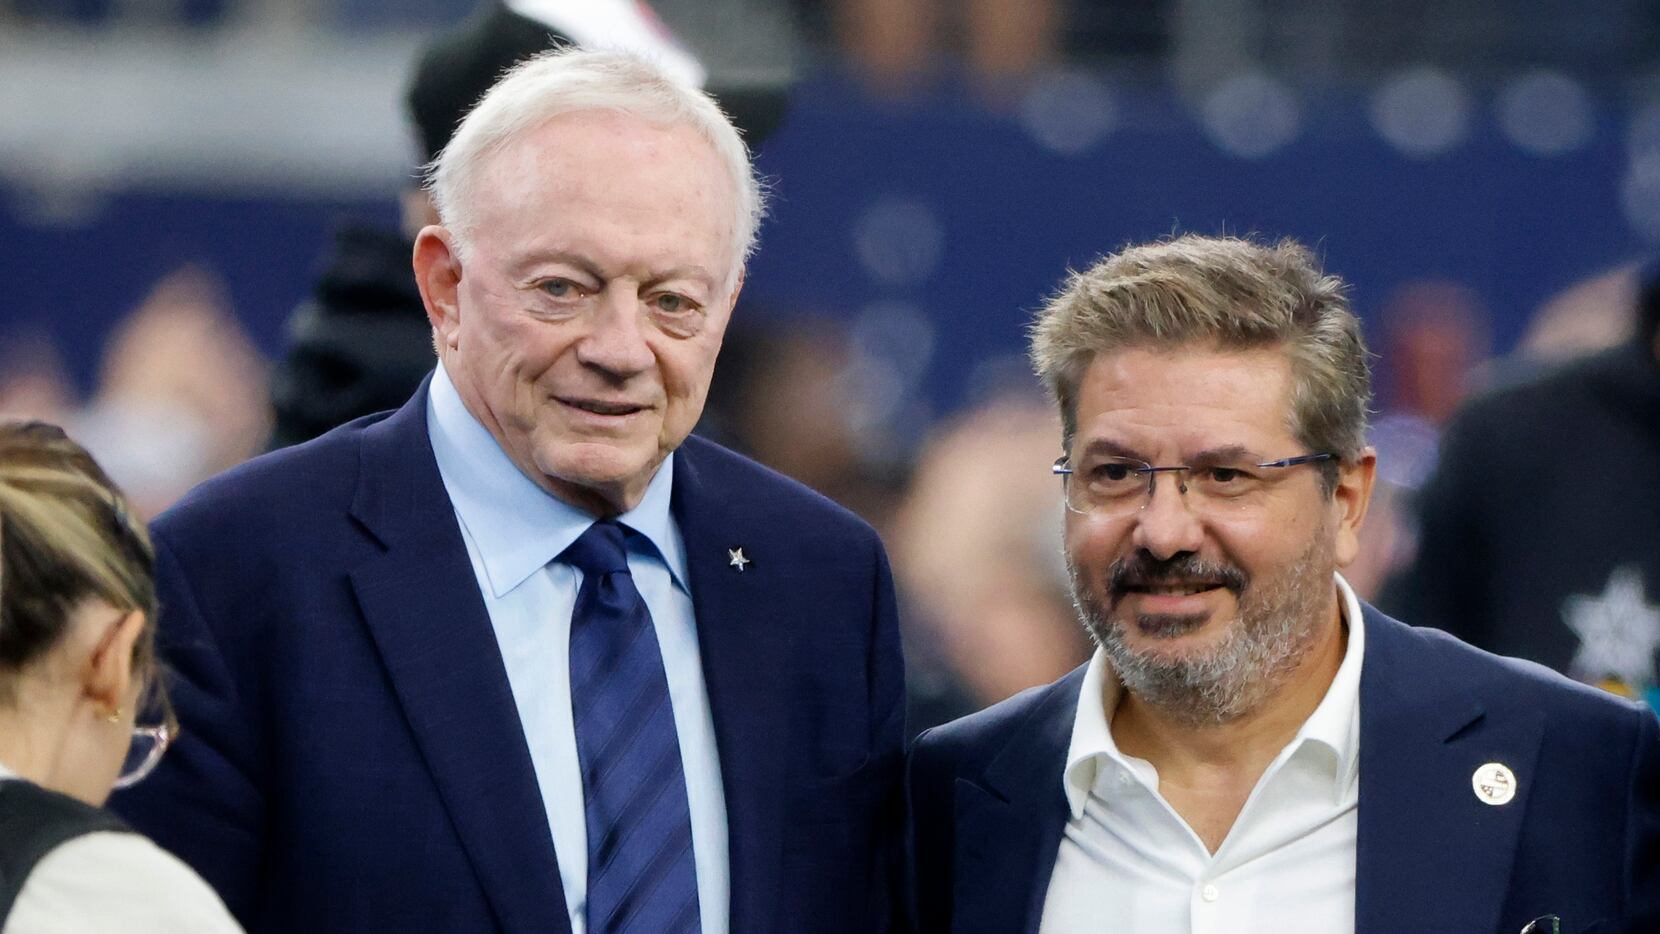 Dan Snyder 'has dirt' on Jerry Jones, hired PI to track NFL owners, per  report